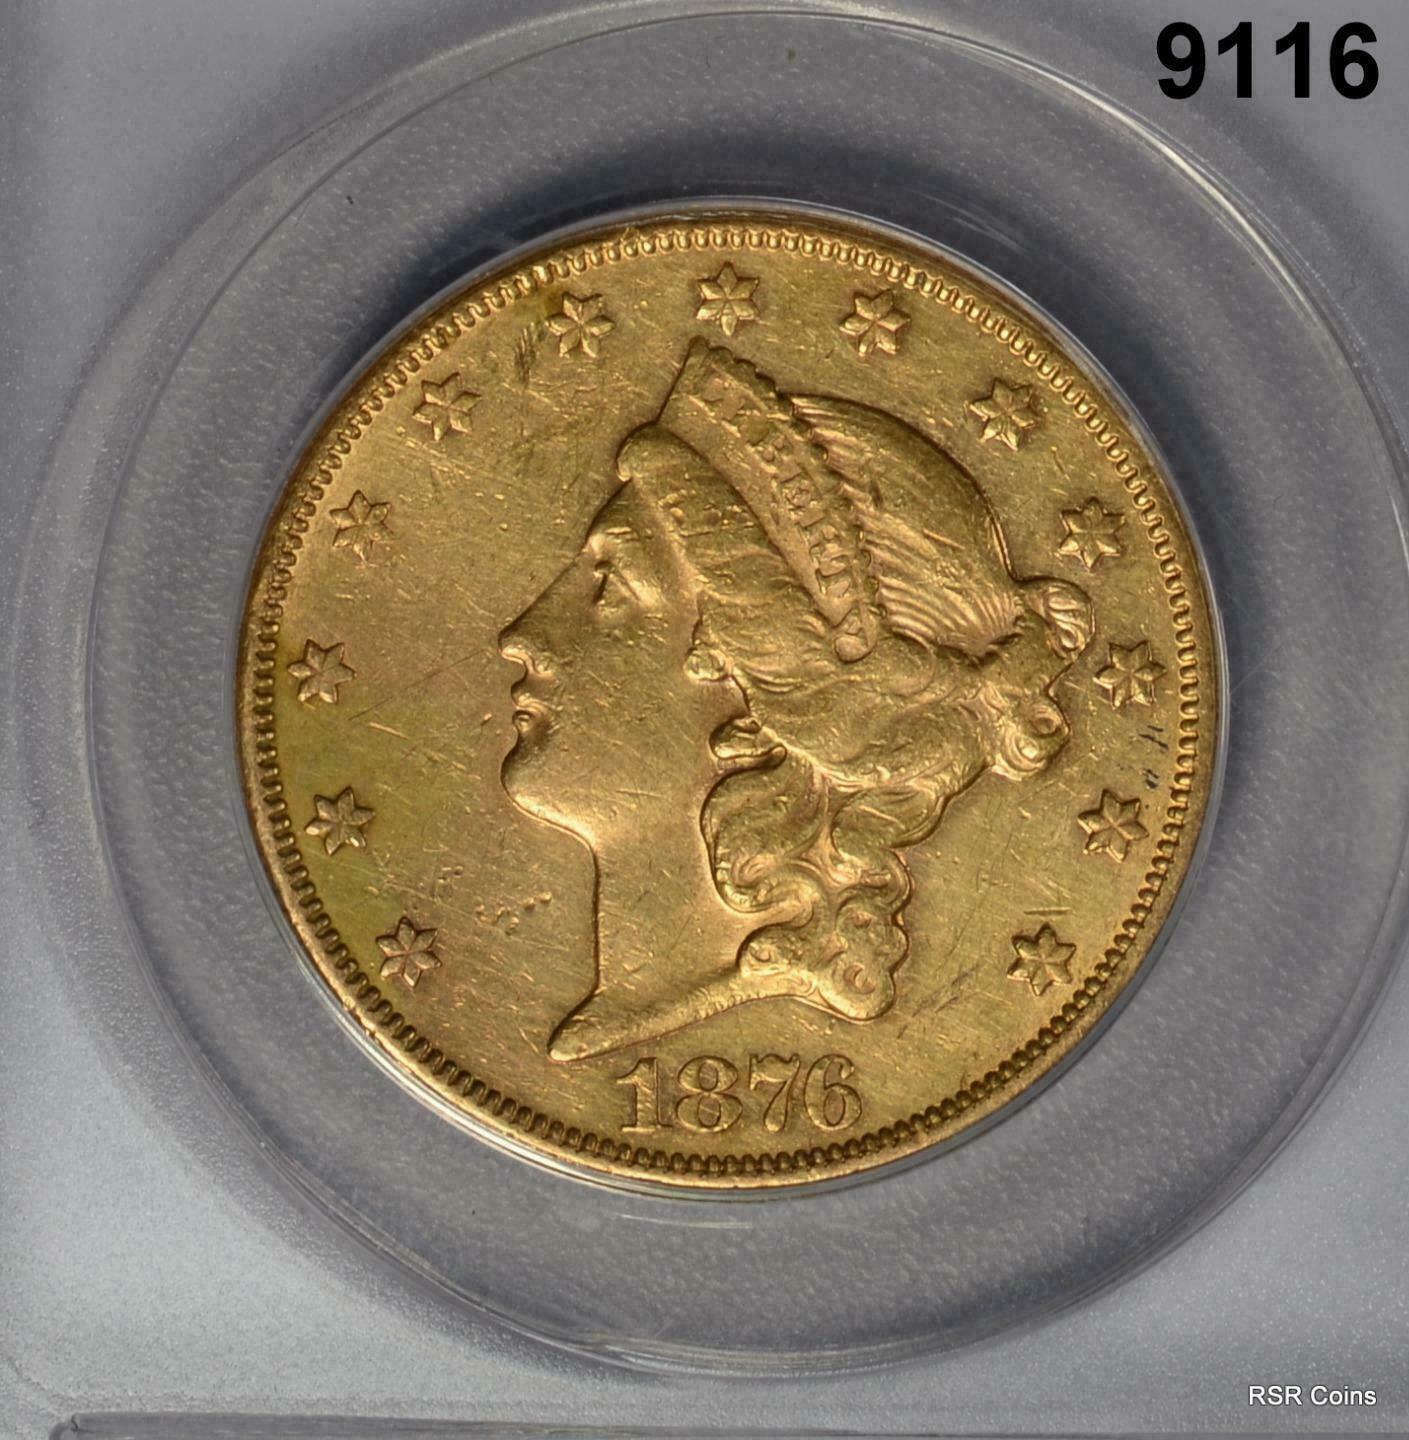 1876 CC RARE $20 GOLD LIBERTY ANACS CERTIFIED AU50 CLEANED MINTAGE 138,441 #9116